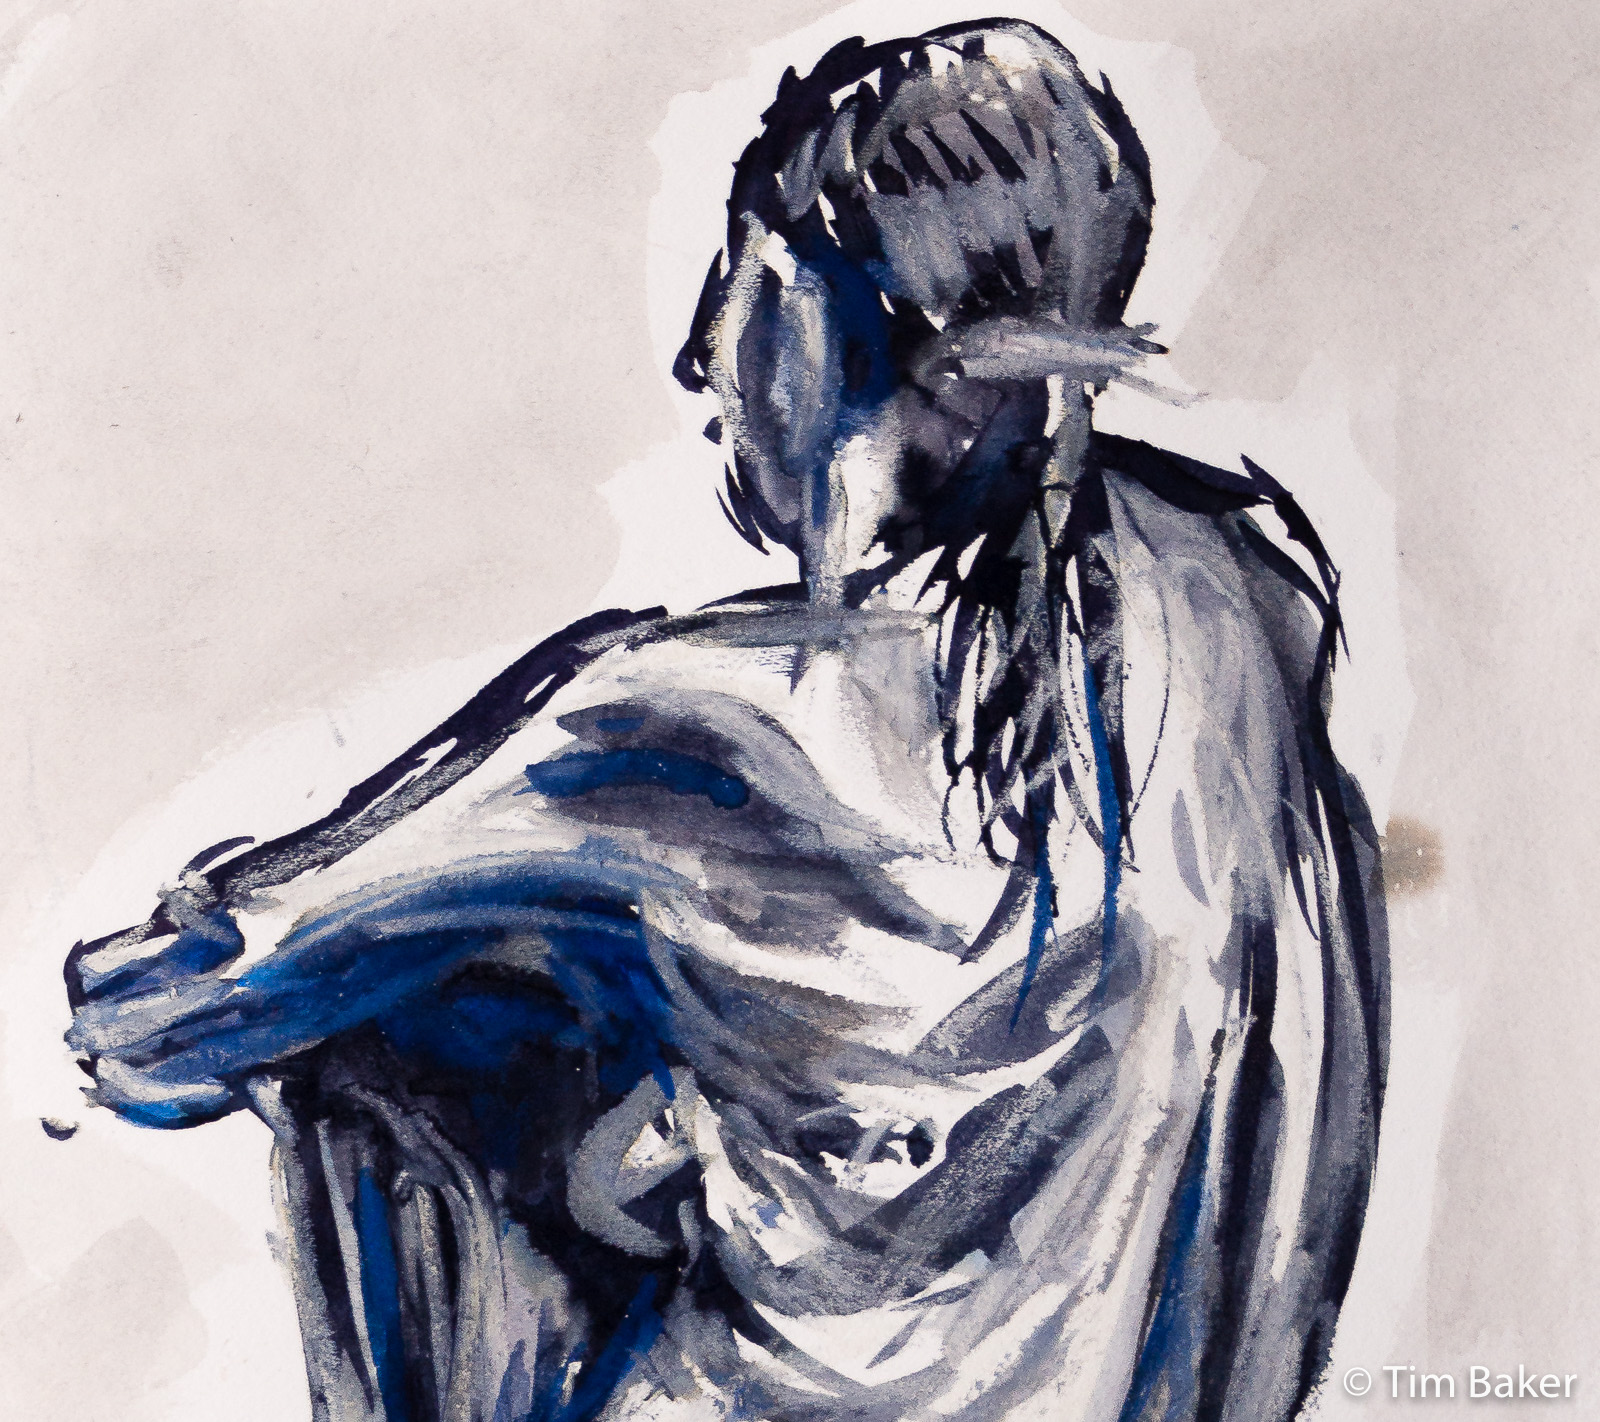 Gabriella (Megan) - detail, Life Drawing #70, Diamine Registrar's Ink with brush, Conte crayon and watercolour, 25x35.5cm, Fabriano Rosaspina paper.